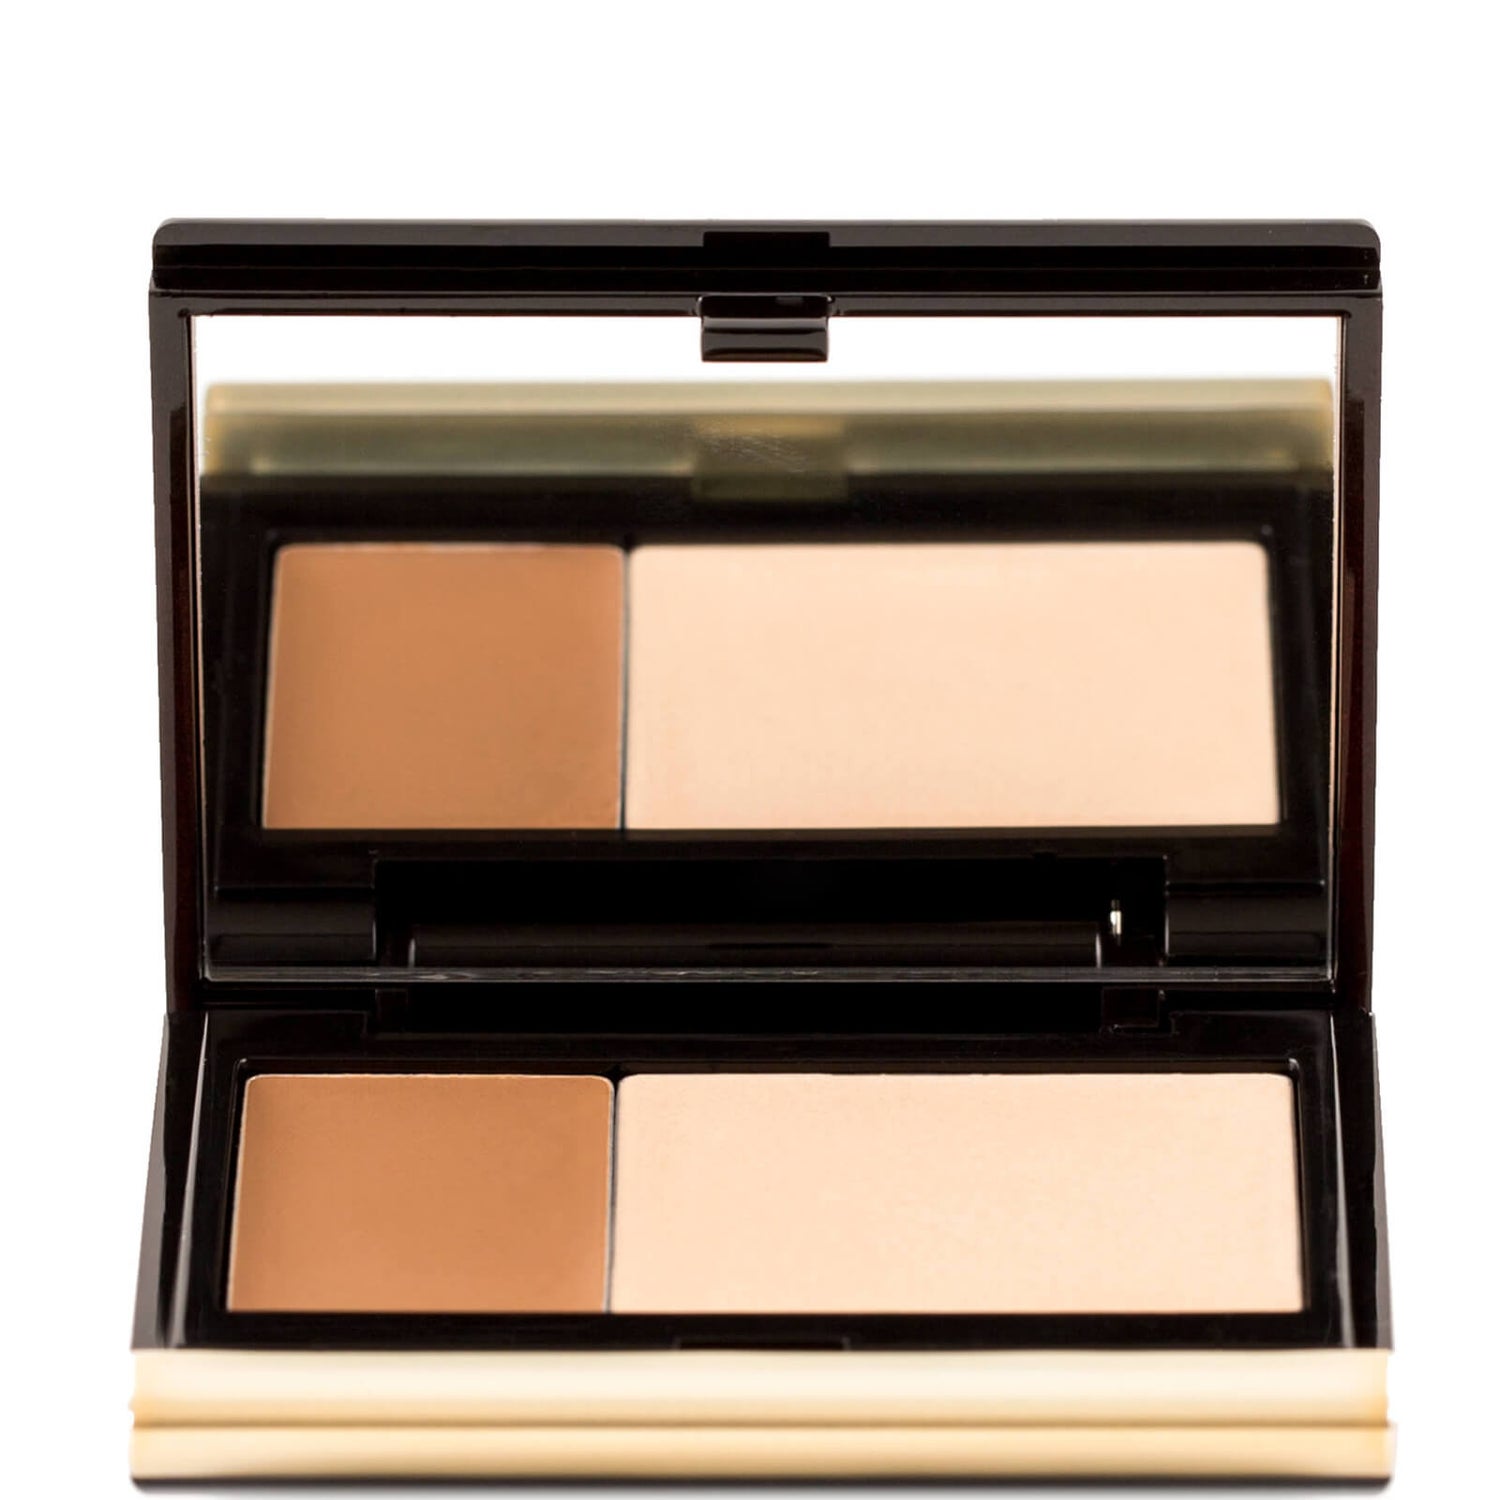 Kevyn Aucoin The Creamy Glow Duo - Sculpting Medium/Candlelight